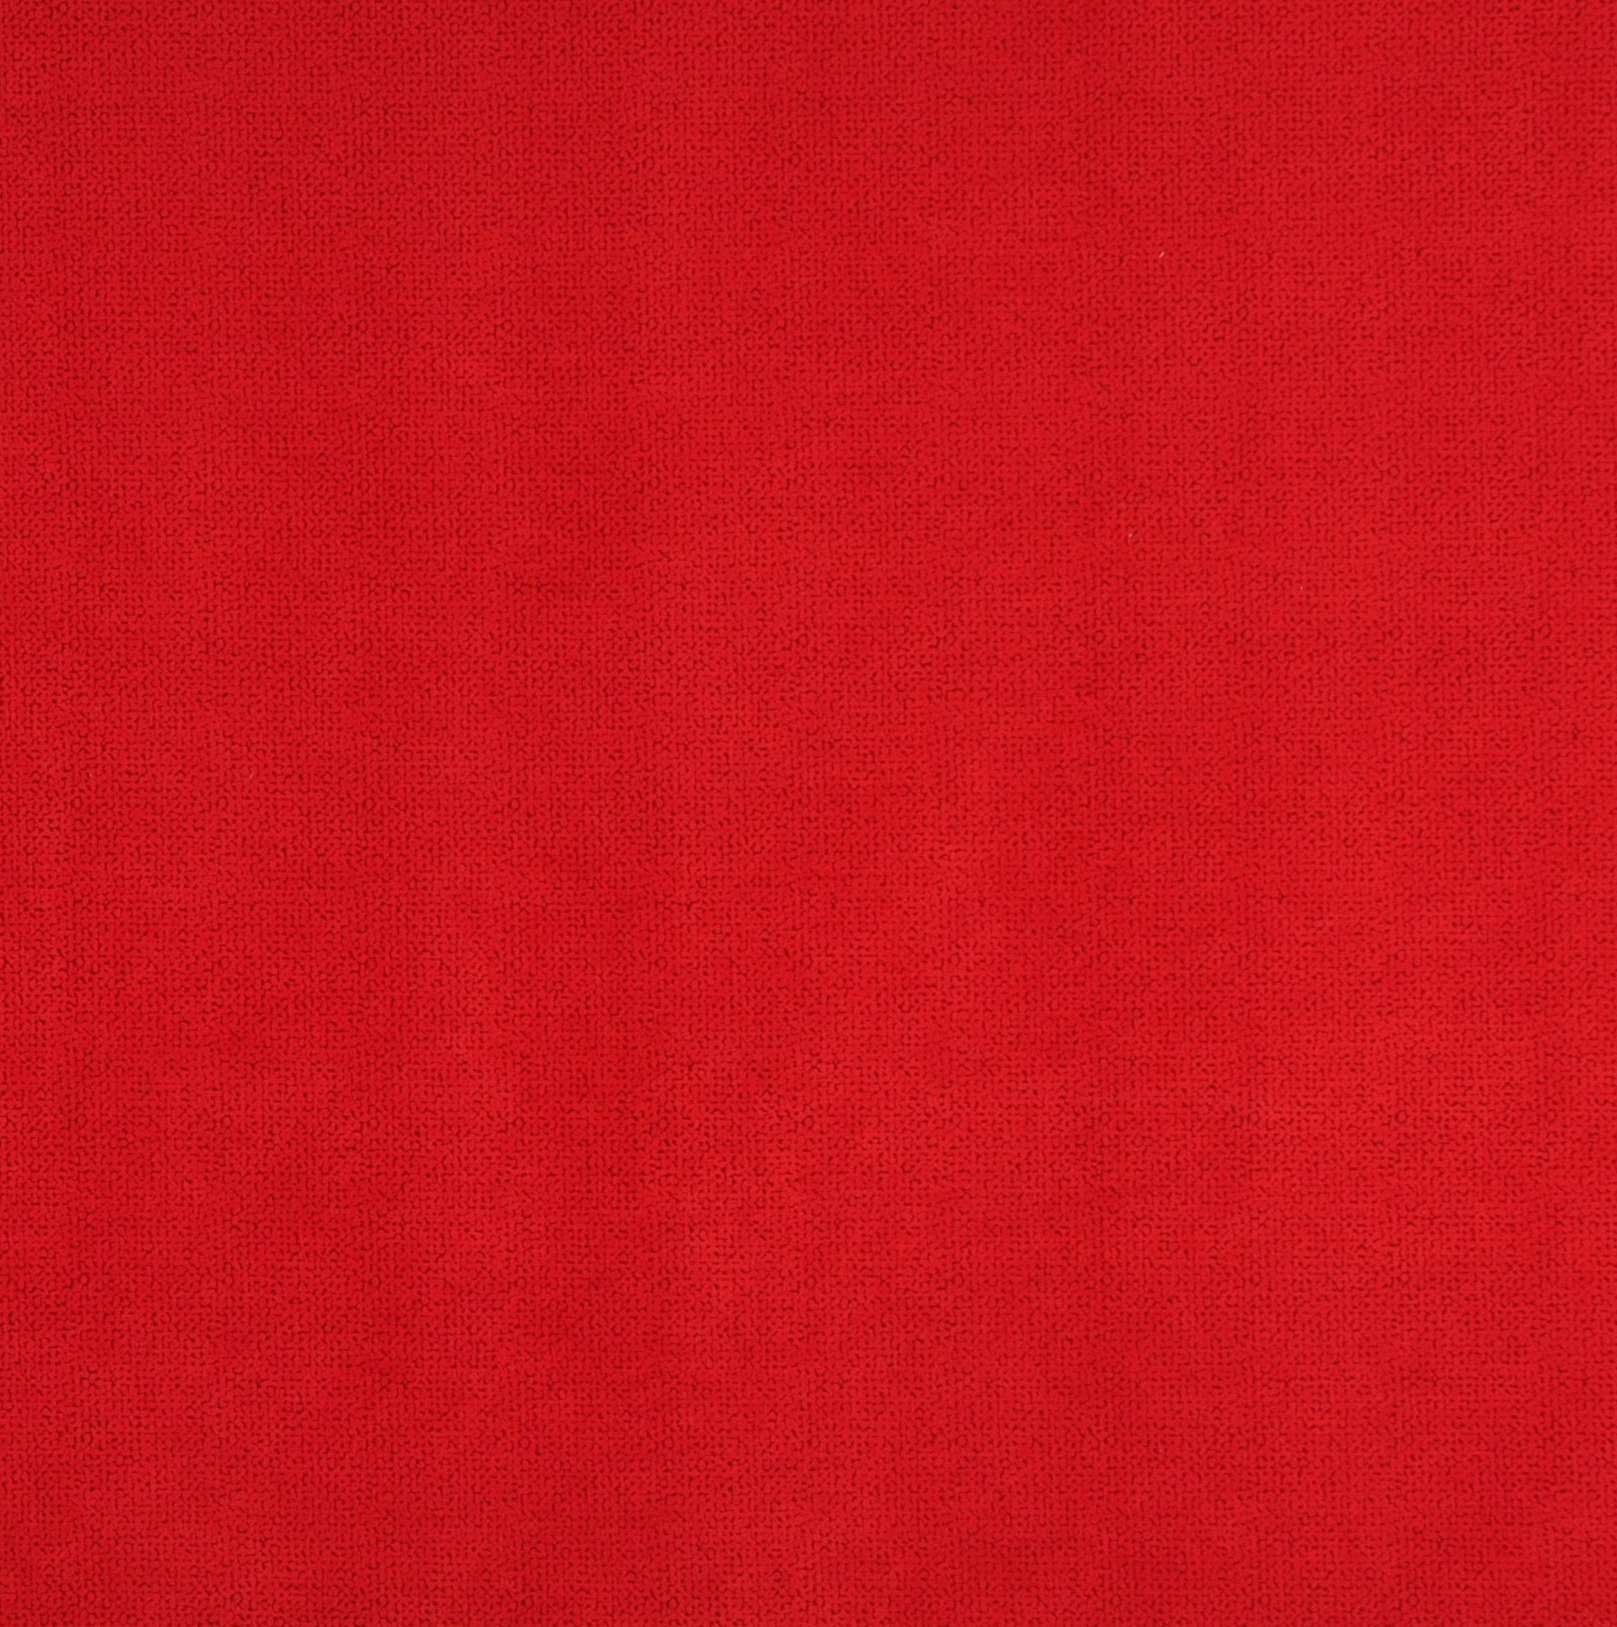 Red Burgundy Contemporary Microfiber Upholstery Fabric